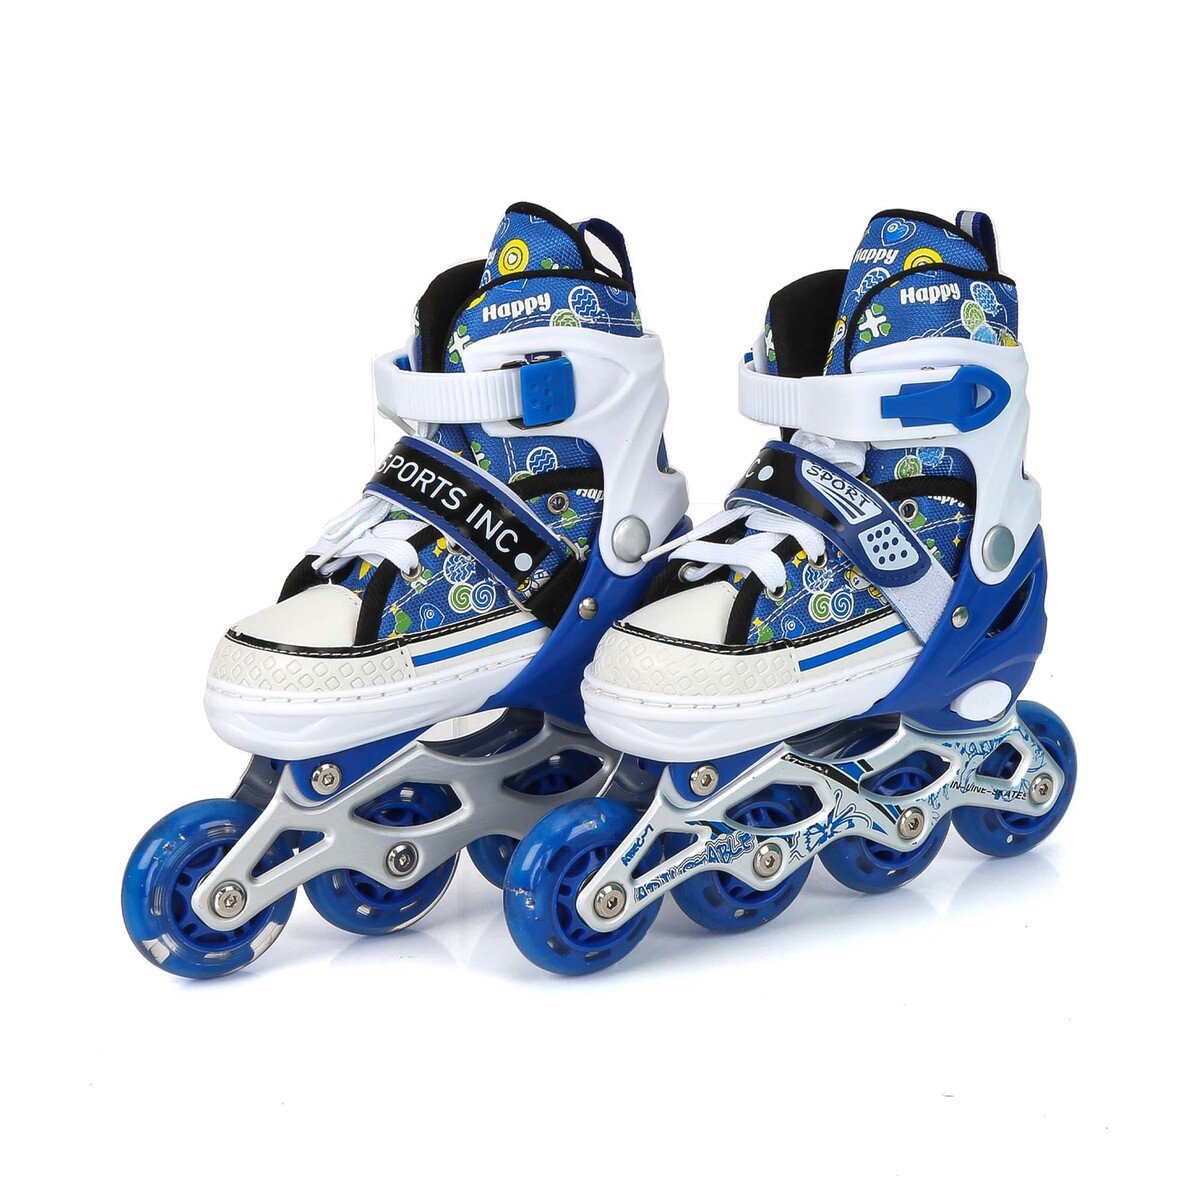 Sports Inc Inline Skate Shoe, 129B, Assorted Colors, Large, Size 39-43